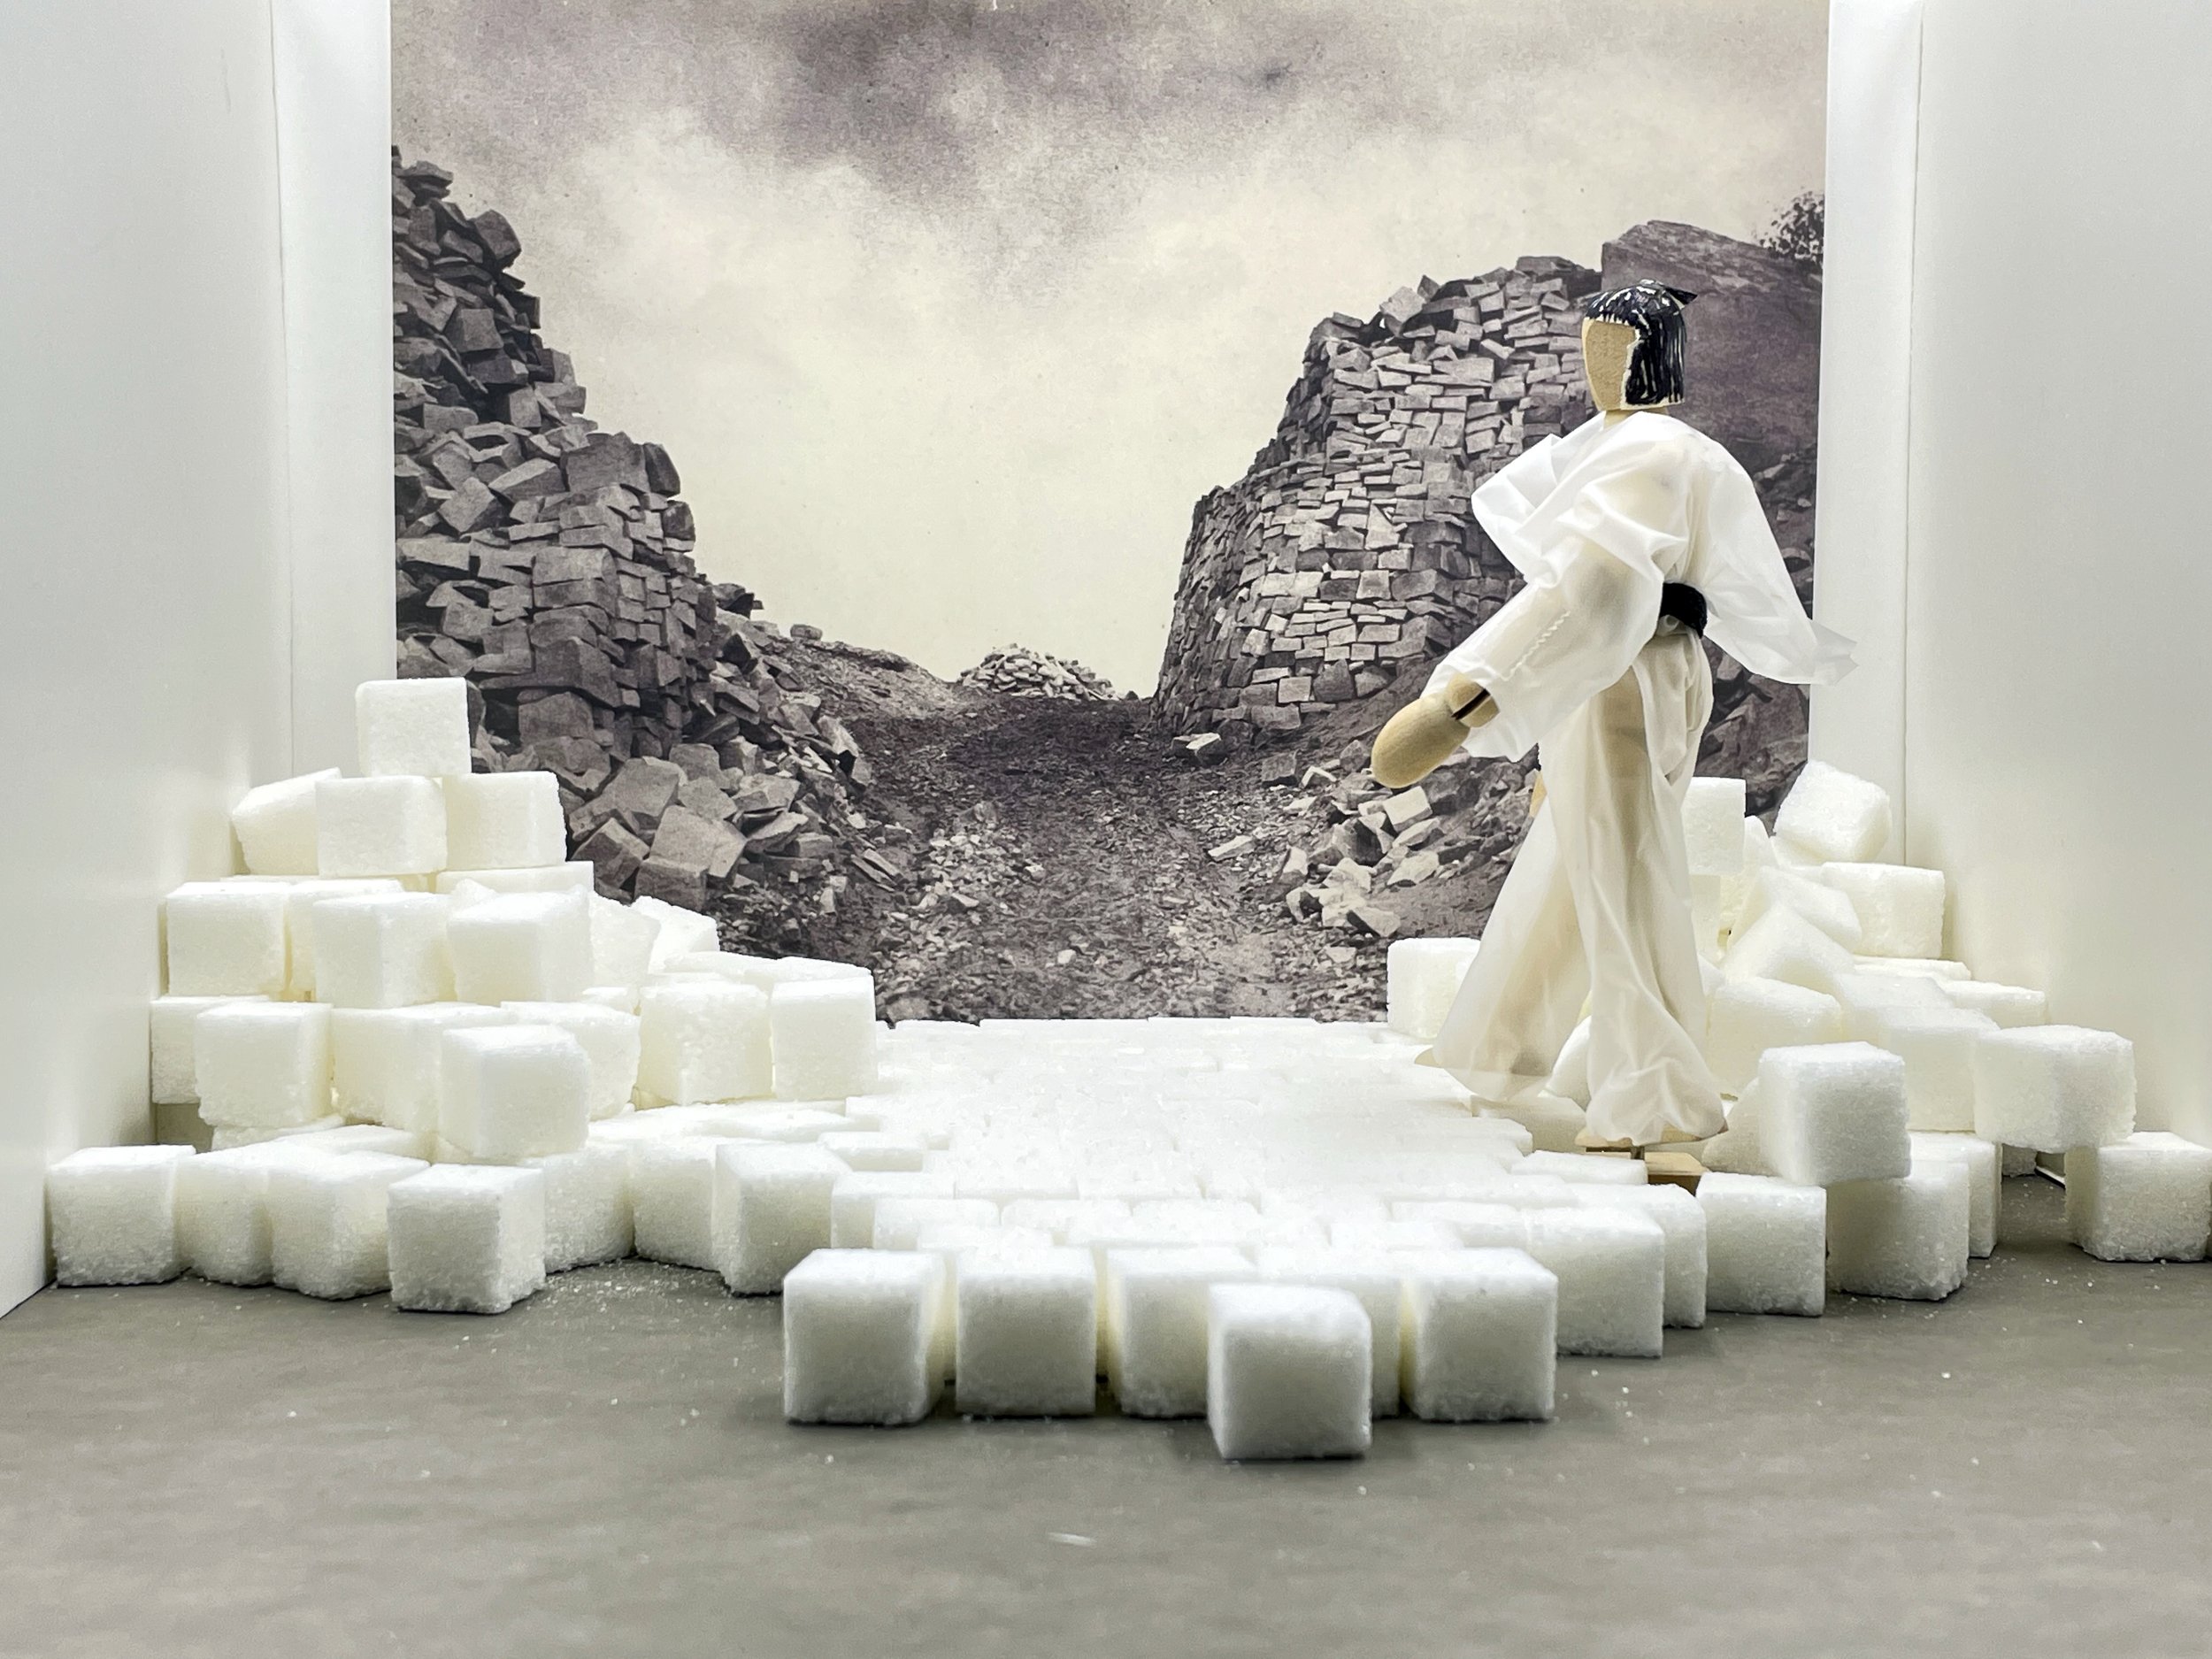 Nadia Martinez, Untitled (Givers and Takers), 2021, Sugar cubes, photography and wooden figure, site-installation proposal.jpg